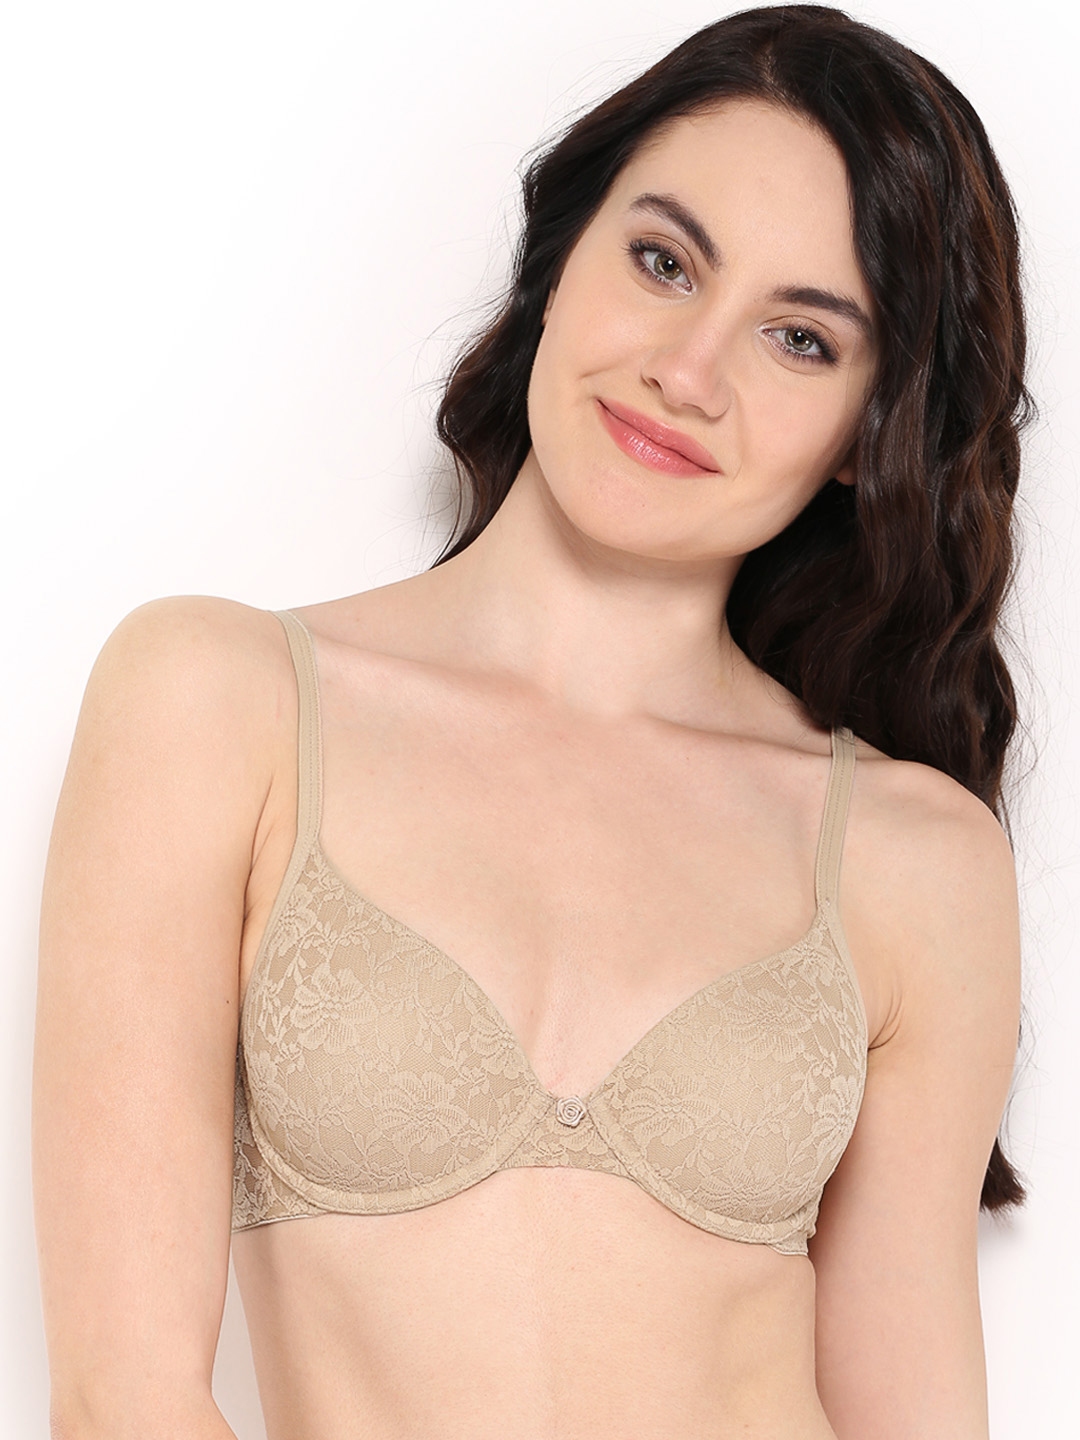 Floral Romance Padded Wired Bra, Fashion Bug, Online Clothing Stores